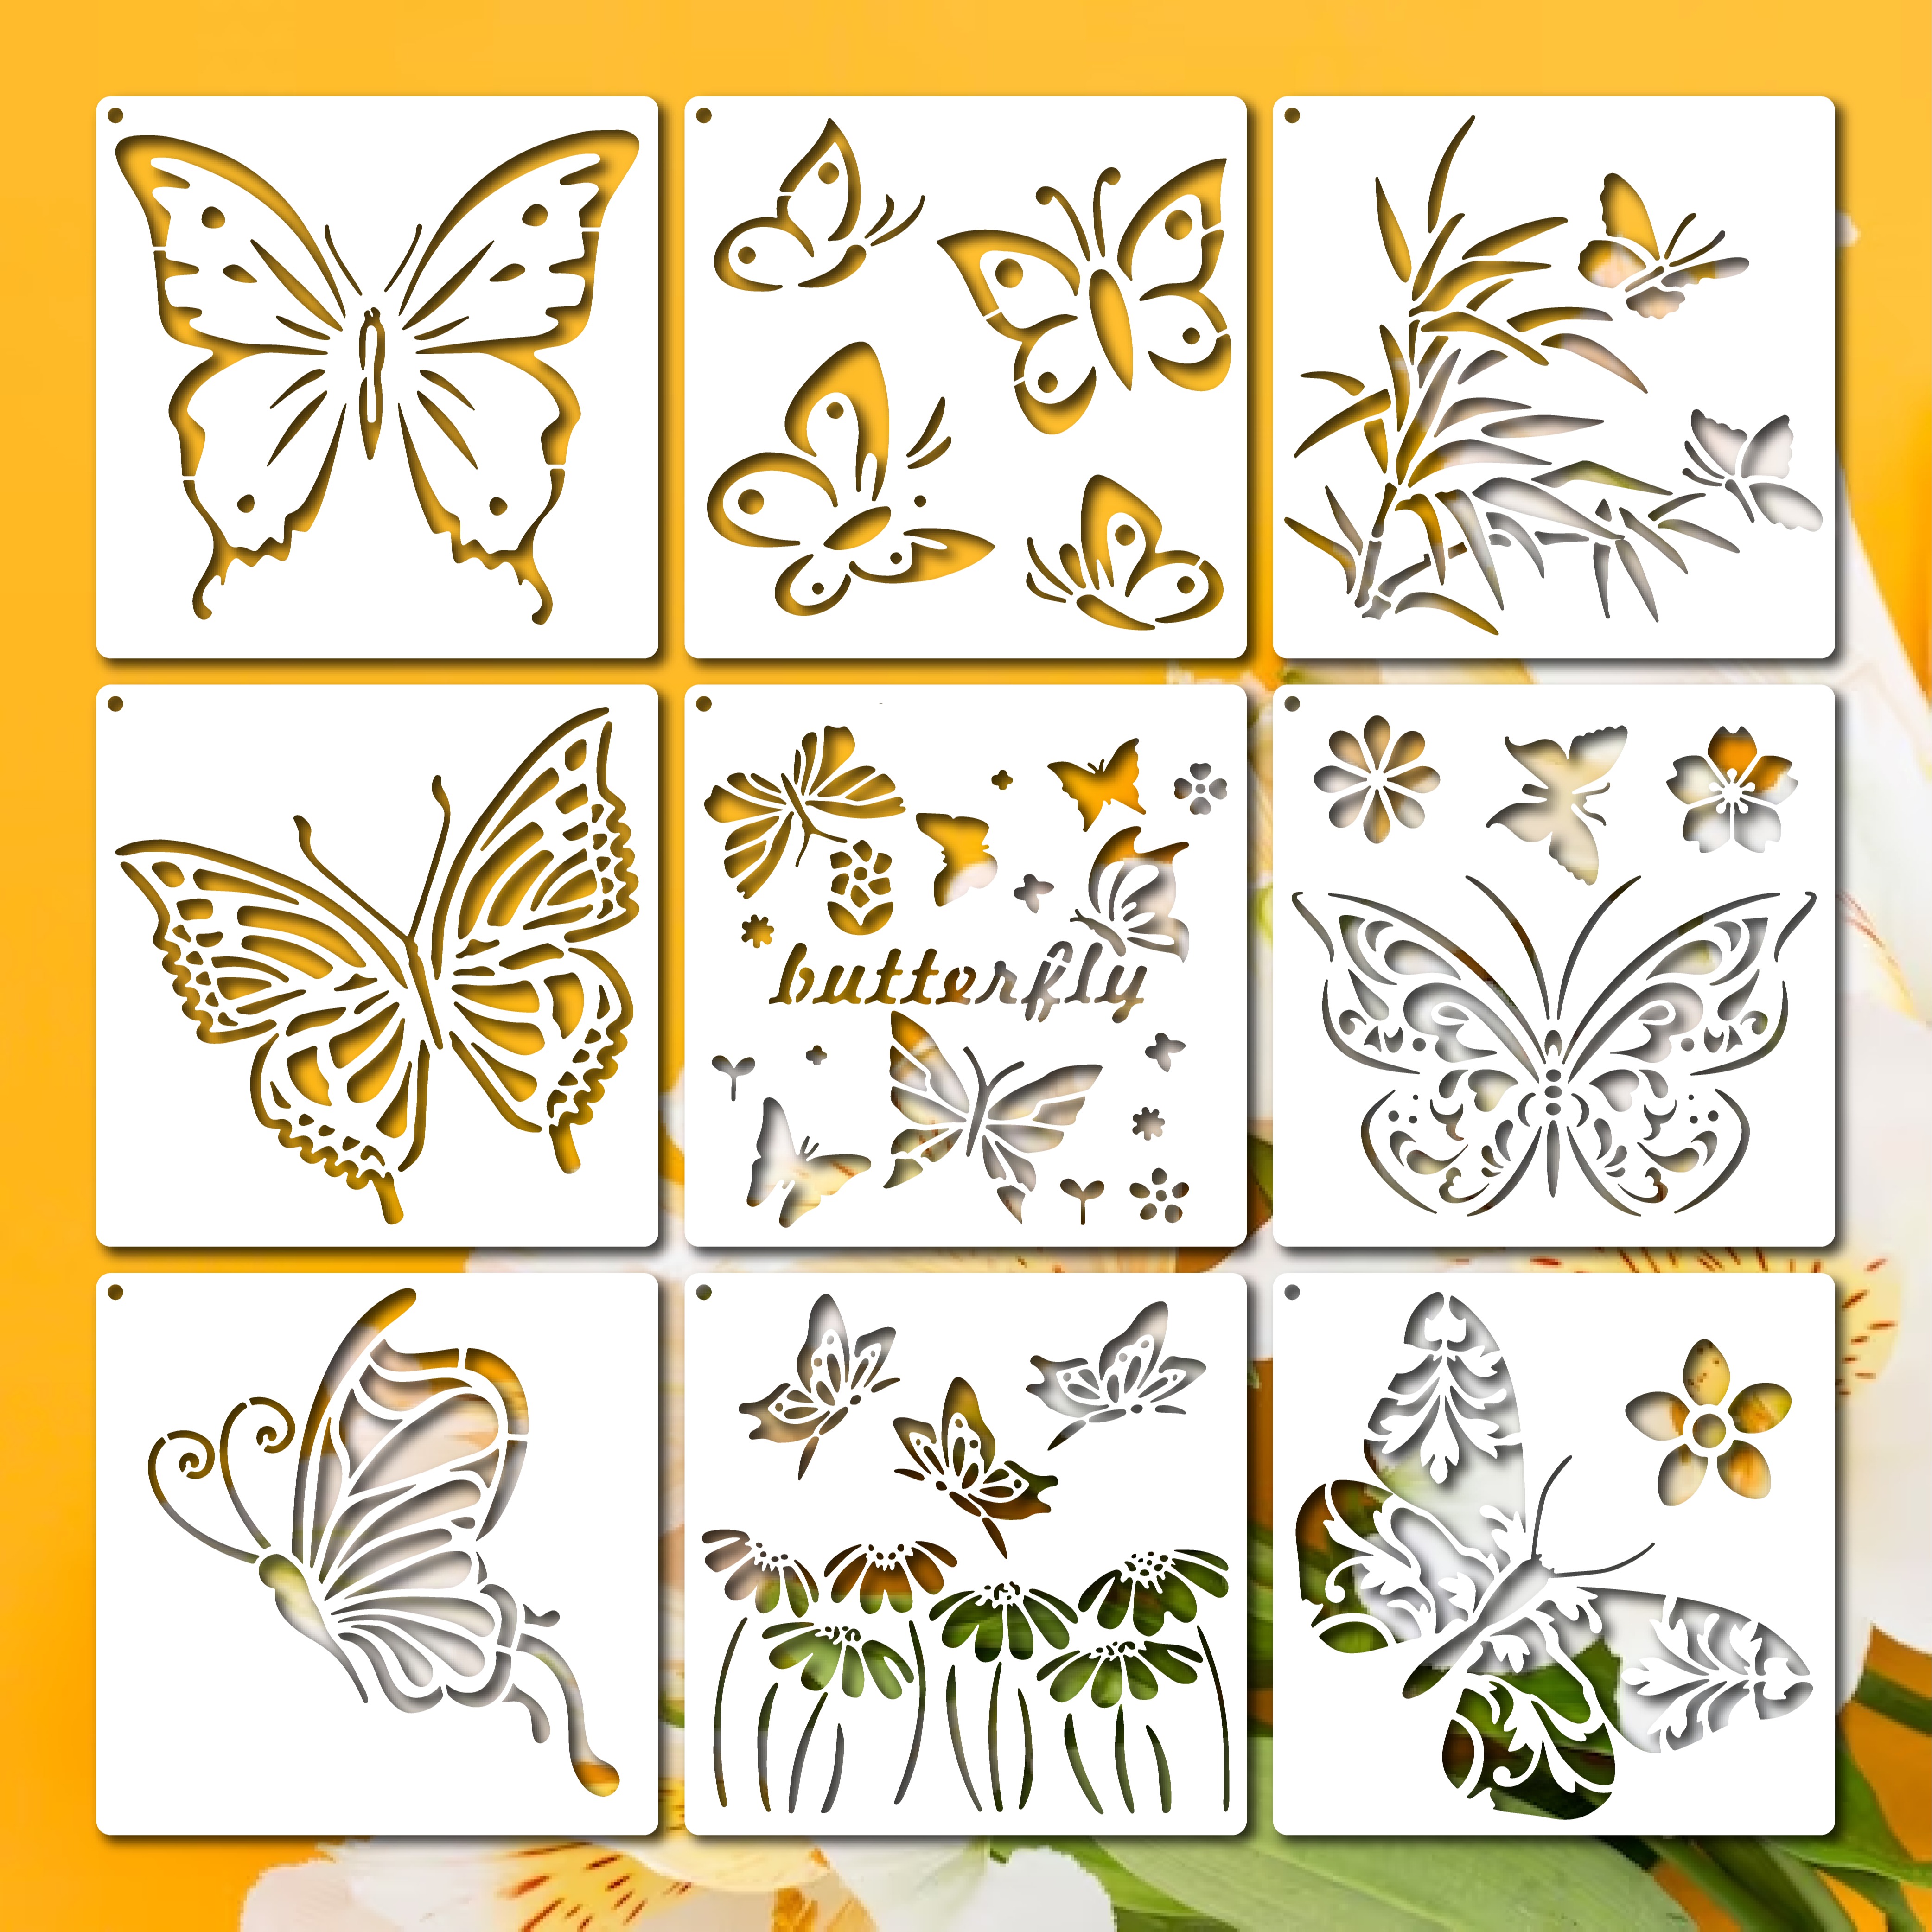 2 Armour Etch Over N Over Reusable Glass Etching Stencils Set, Hummingbird, Butterfly Themed Stencil